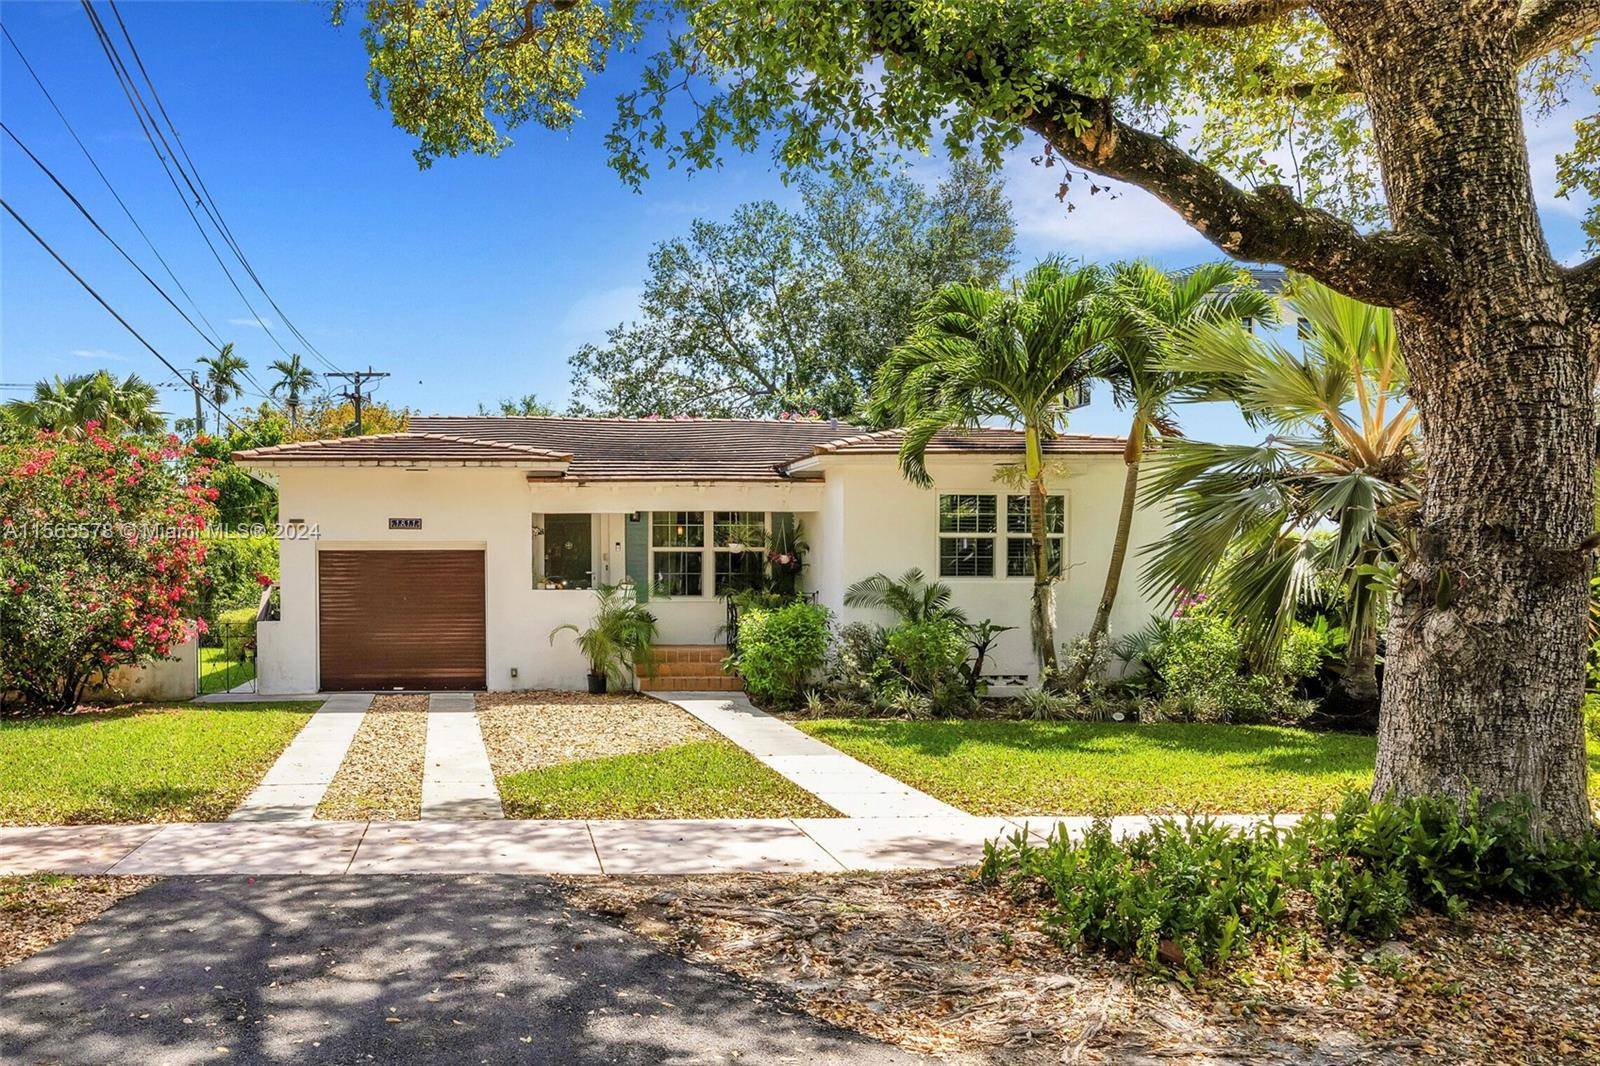 Nestled in Coral Gables, this charming 2 bedroom, 2 bathroom home exudes warmth with its timeless wood floors vaulted cathedral ceilings creating an expansive atmosphere.